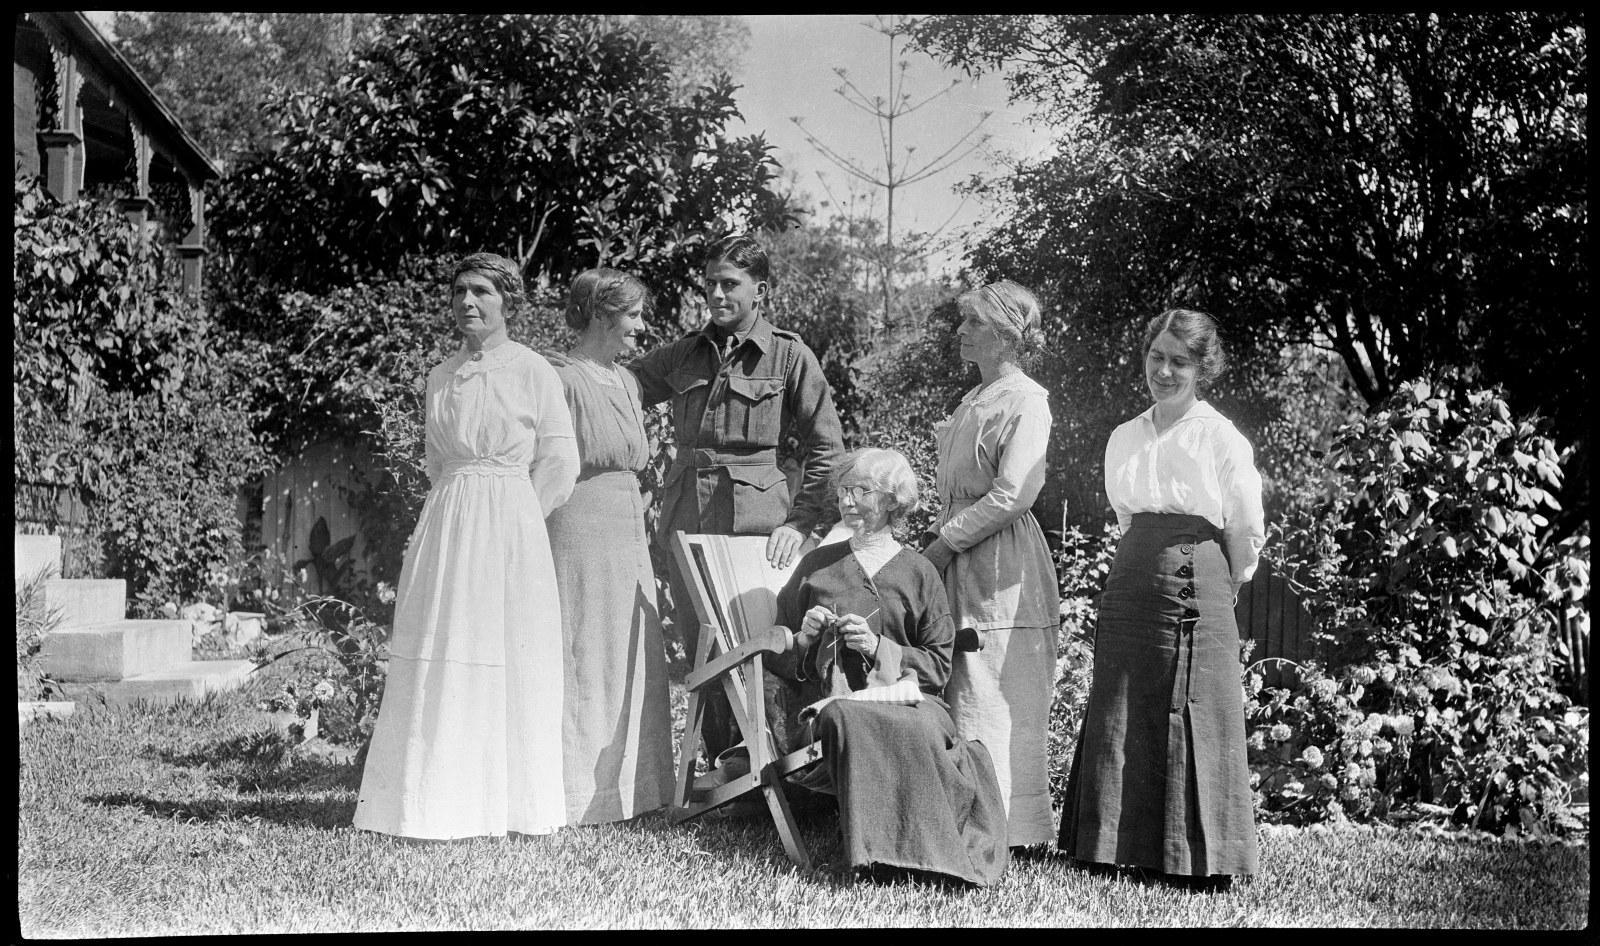 Group of woman standing around older seated woman who is knitting.